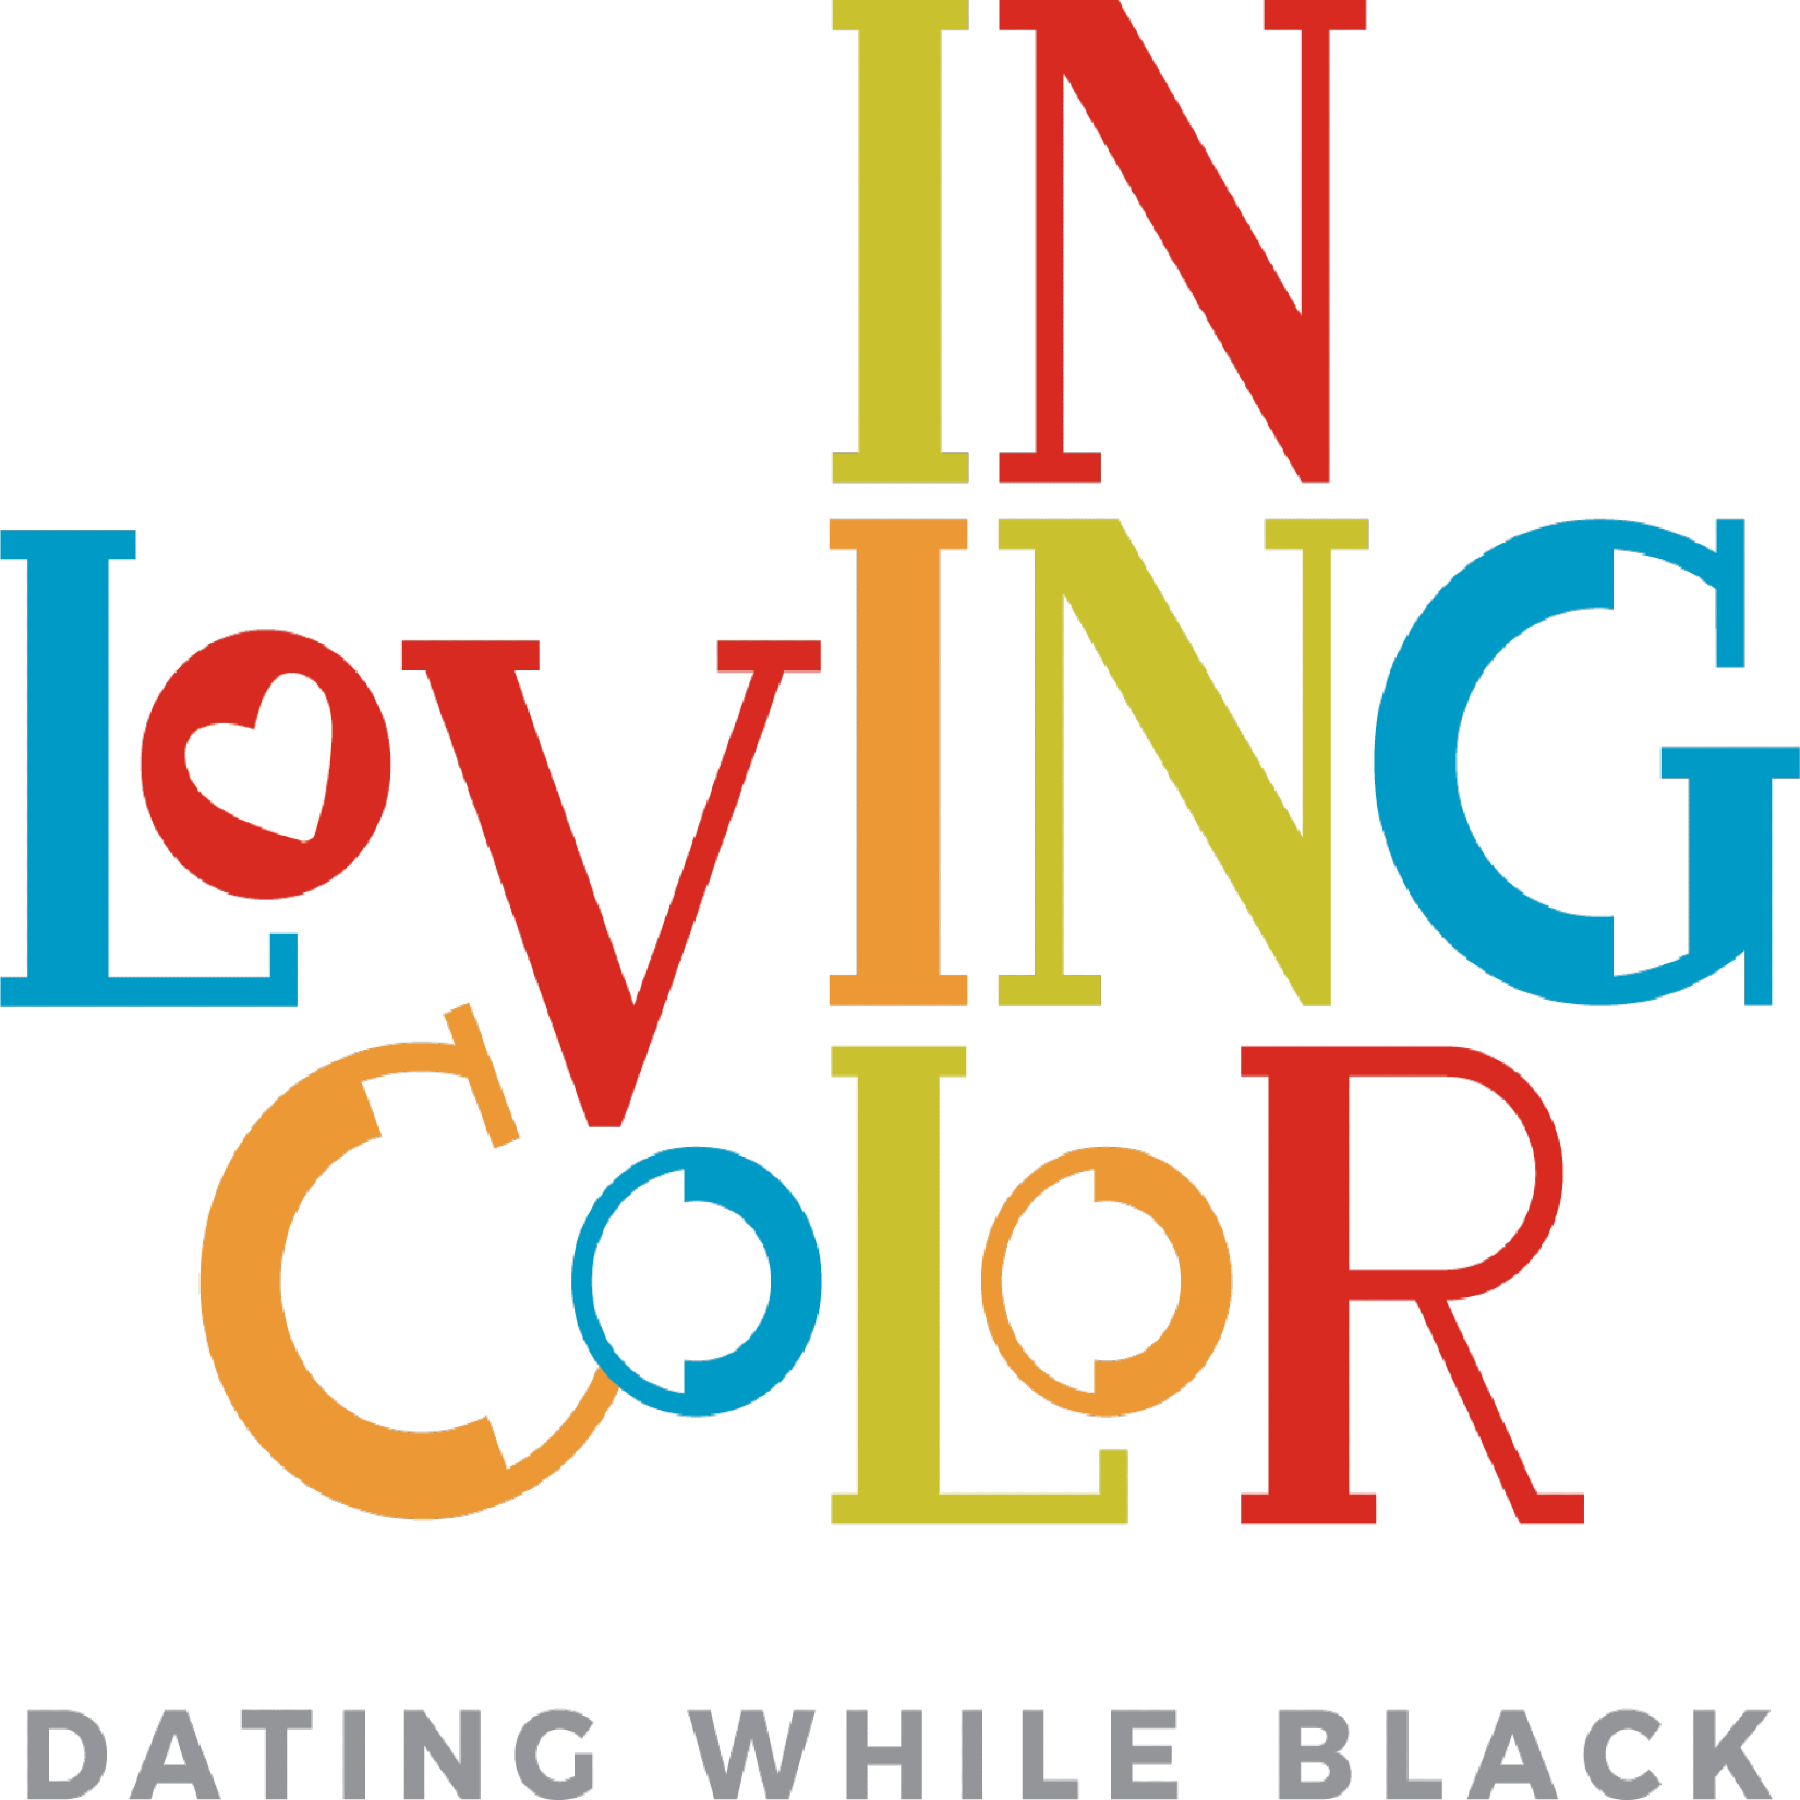 In Loving Color: Dating While Black